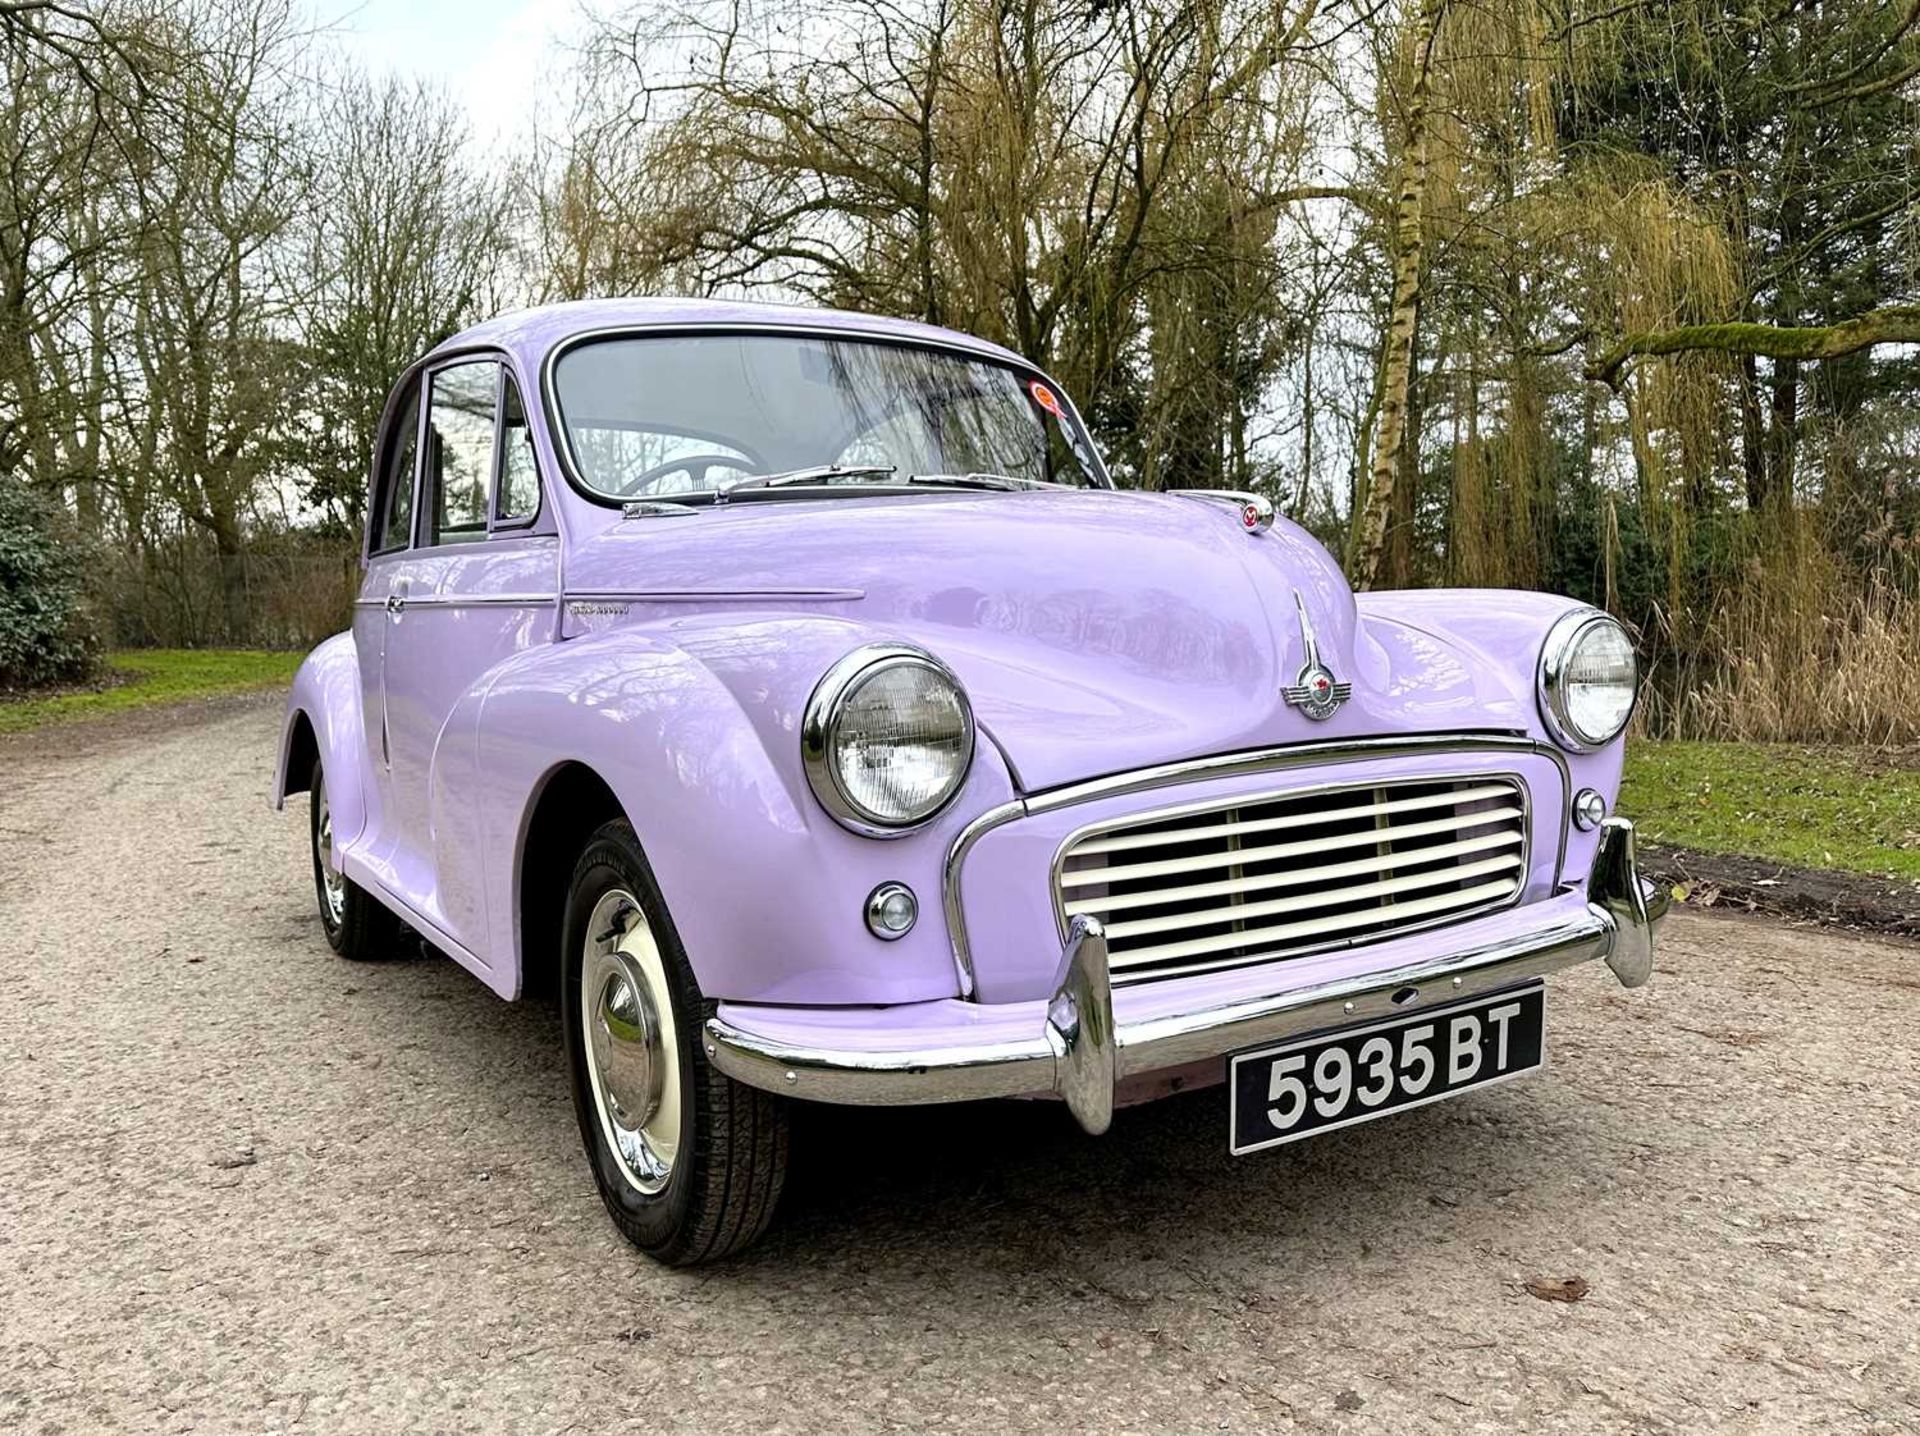 1961 Morris Minor Million 179 of 350 built, fully restored, only three owners from new